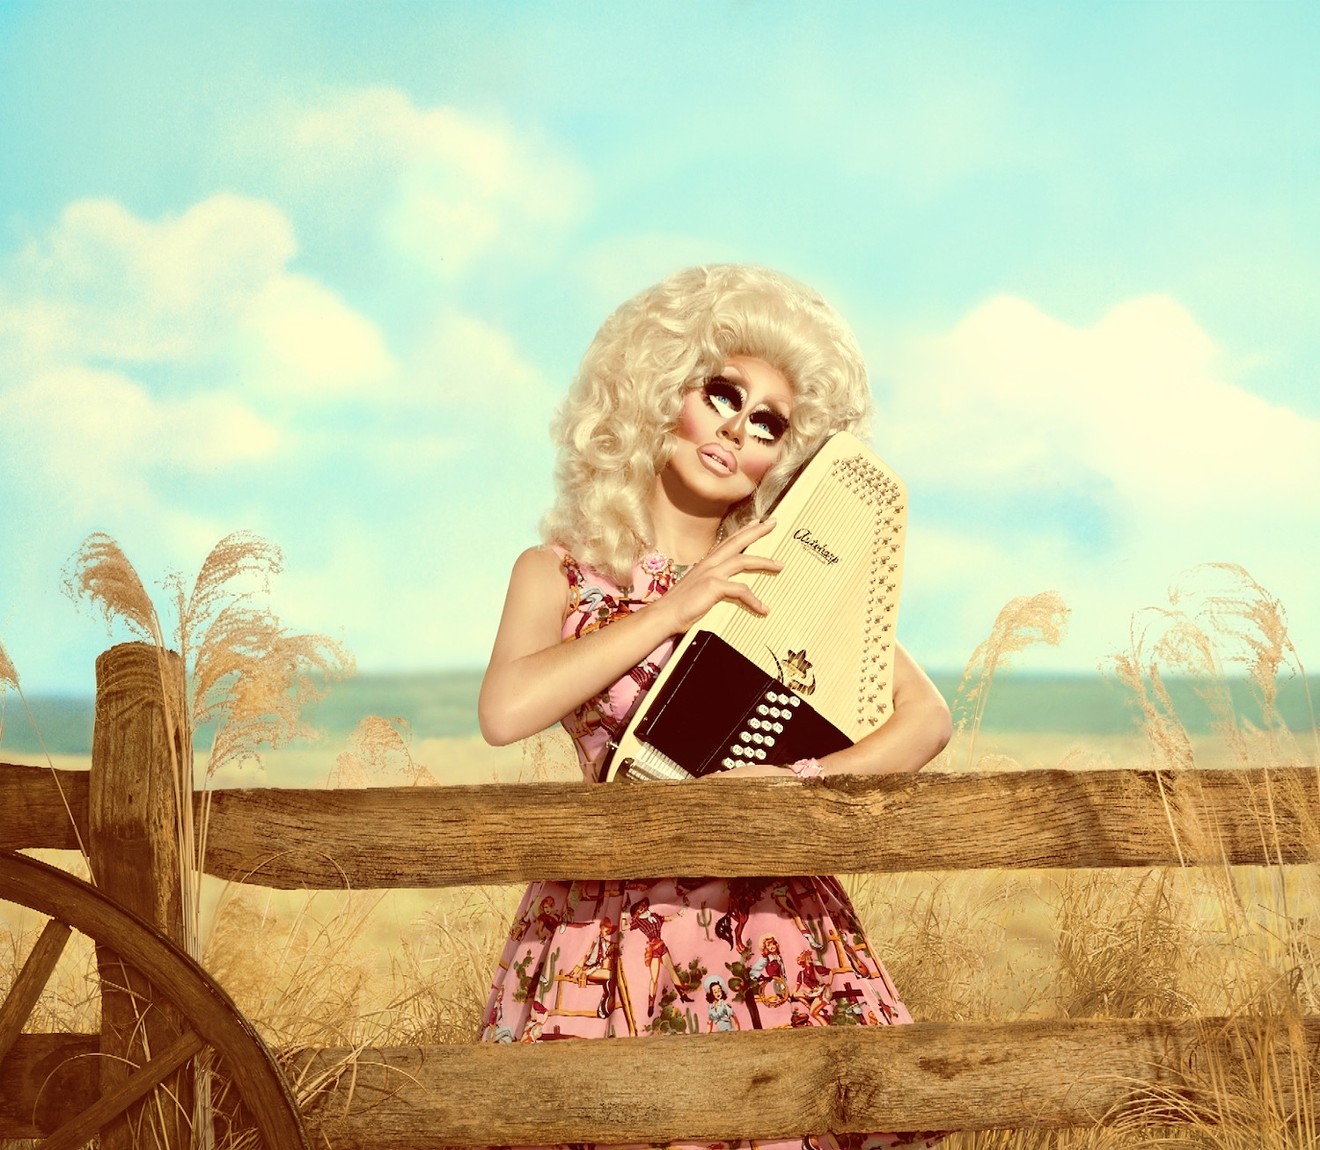 Drag star and musician Trixie Mattel has had an awesome year.